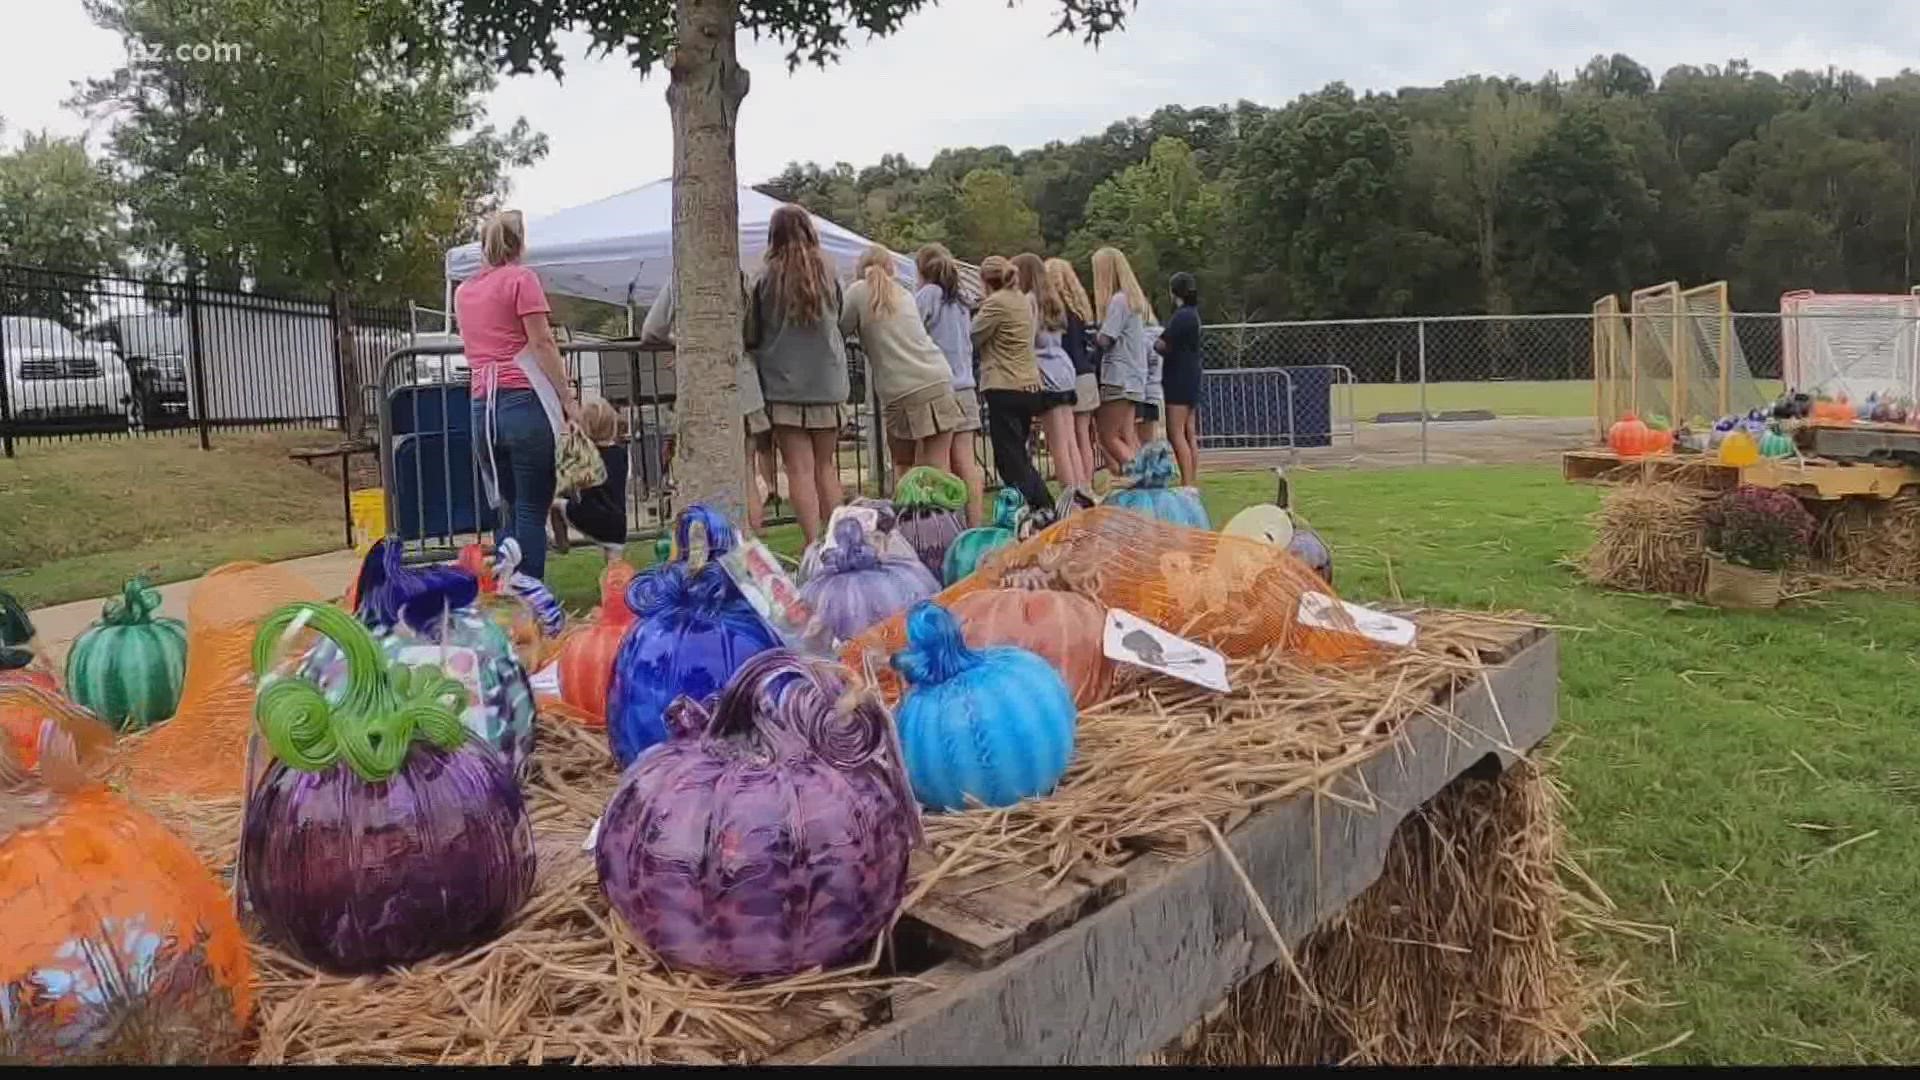 Organizer Kathleen Medlin says there are over a thousand handblown glass pumpkins made by artists across the southeast.